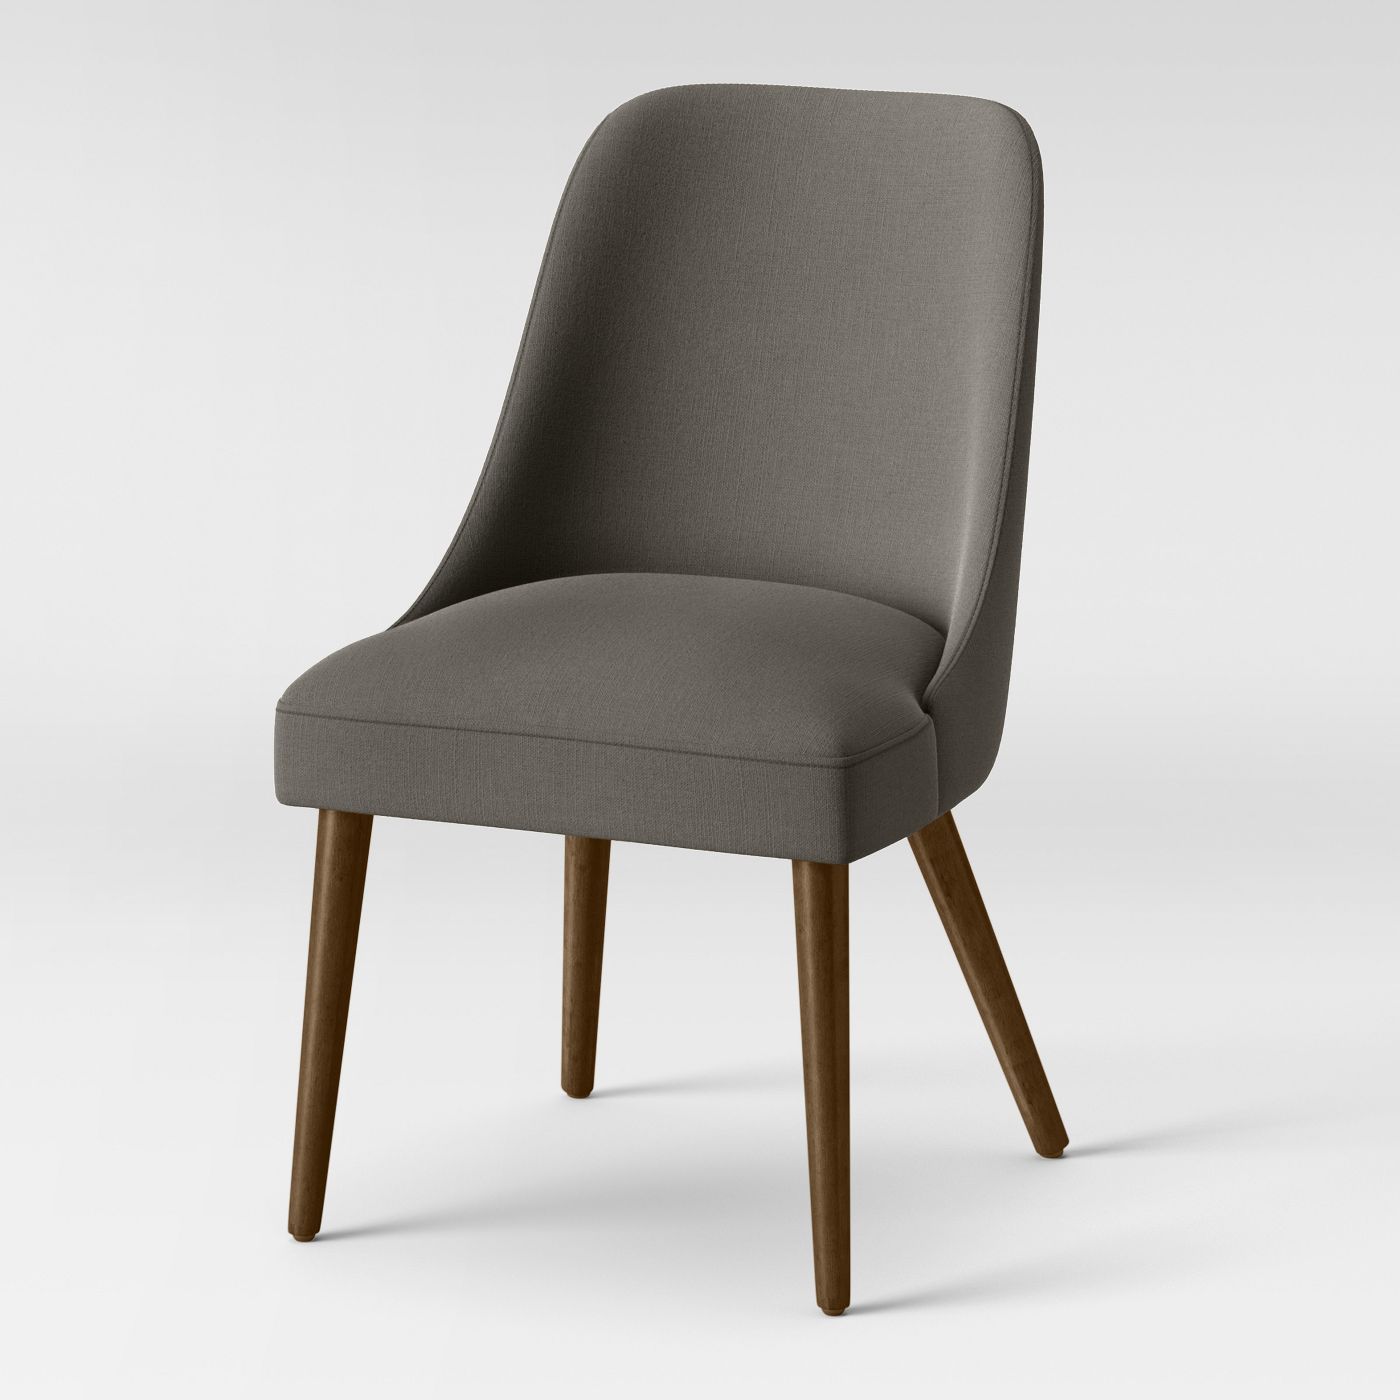 Geller Dining Chair 2019 (2 boxes)